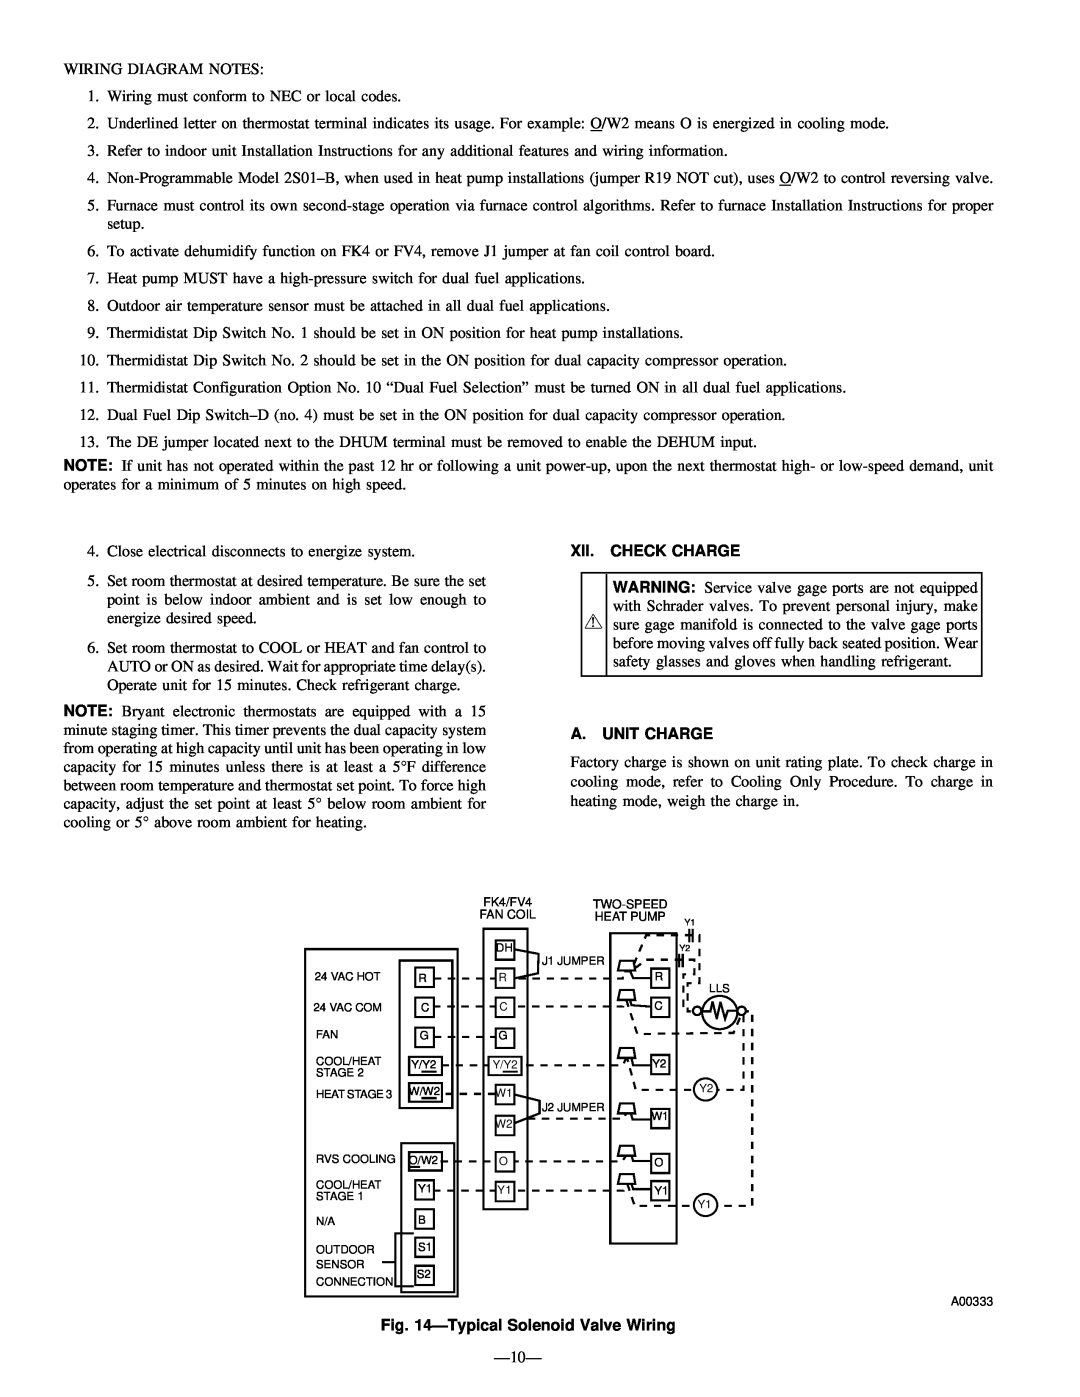 Bryant 698B instruction manual Xii. Check Charge, A. Unit Charge, TypicalSolenoid Valve Wiring 